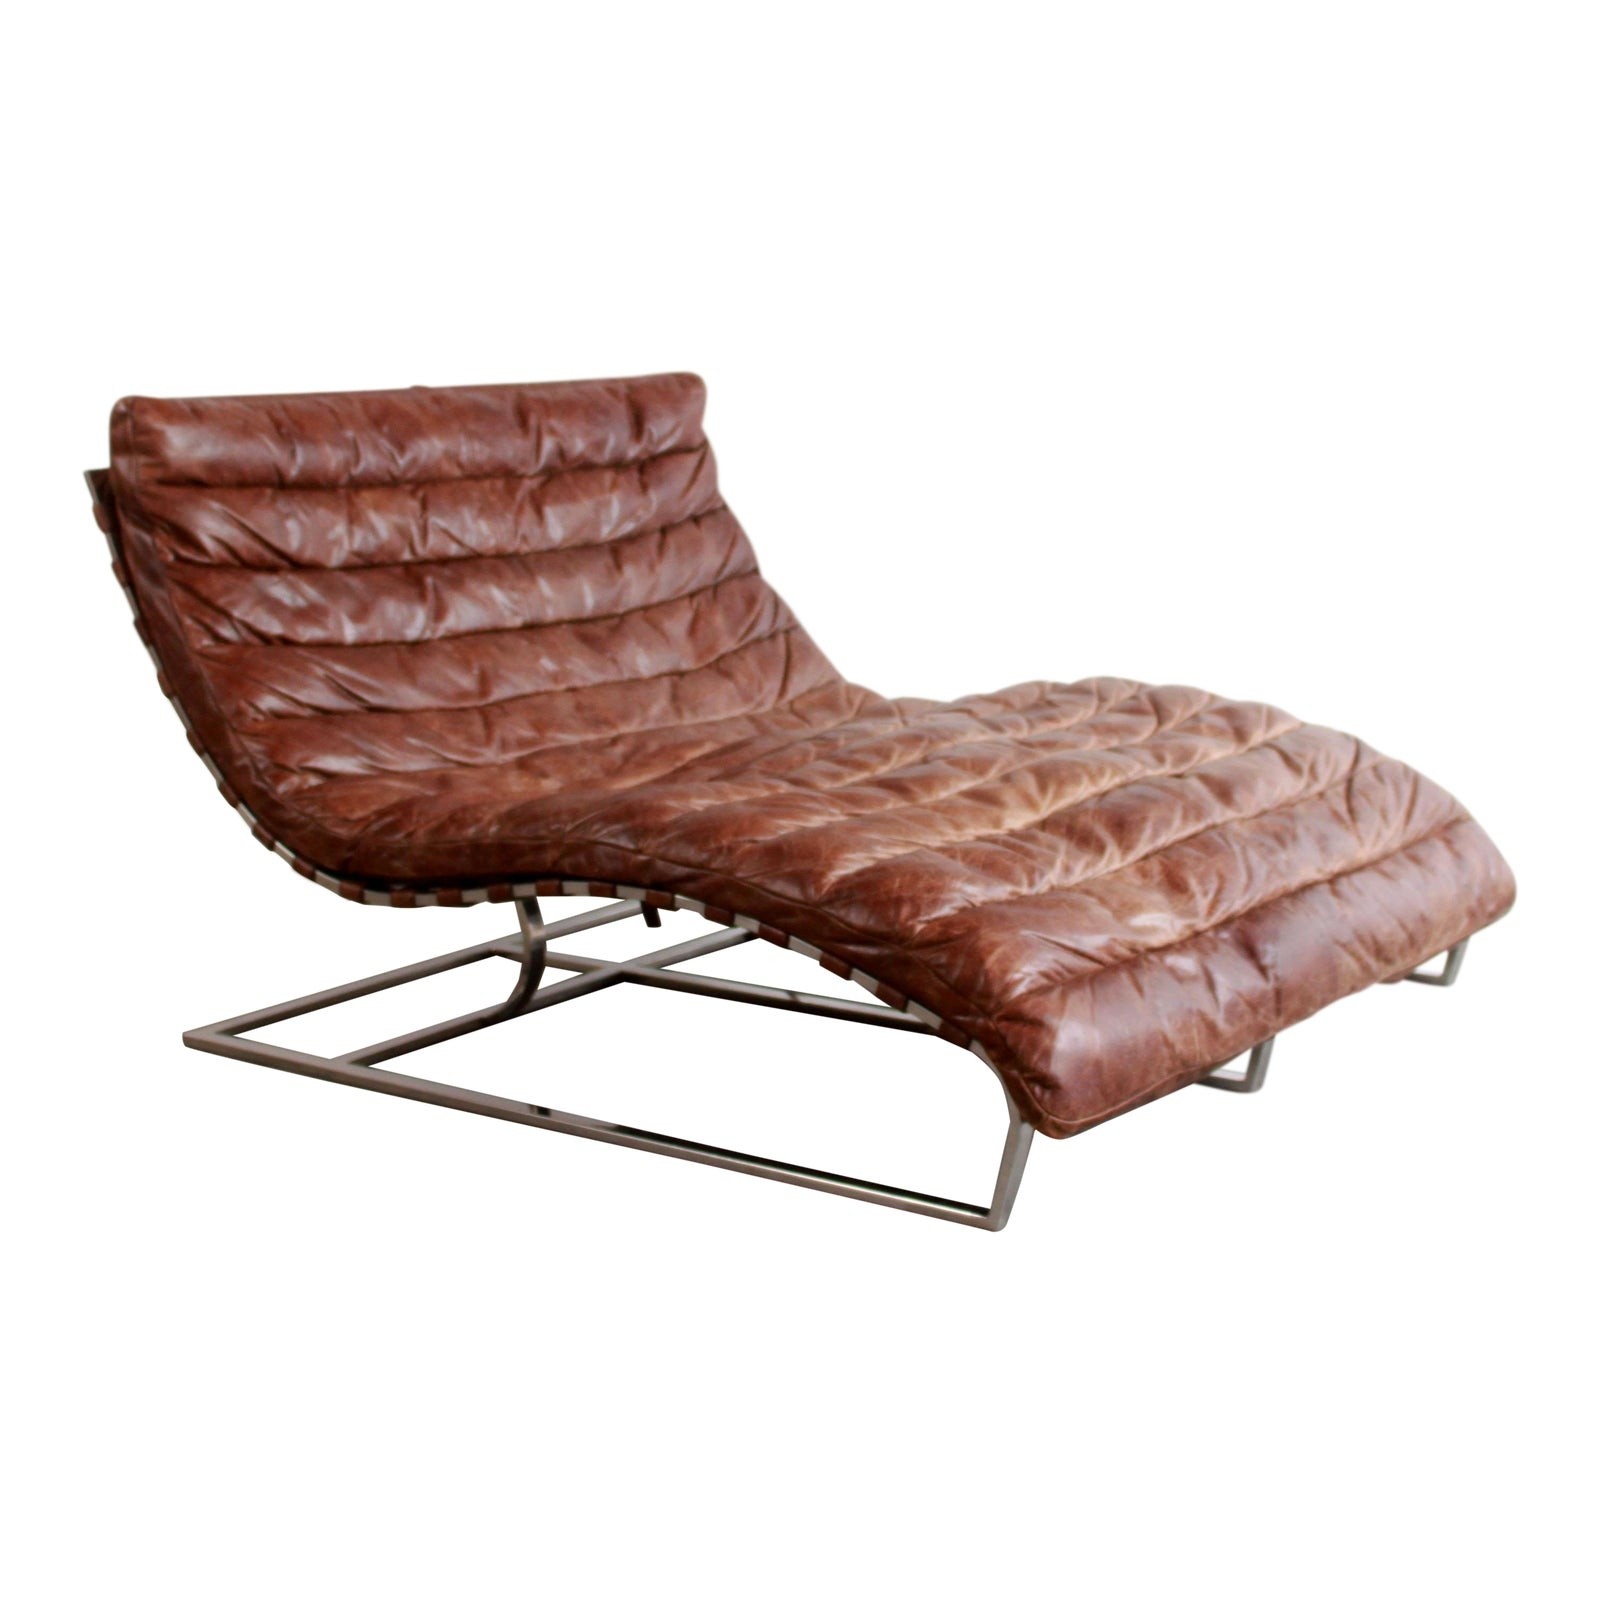 Restoration hardware oviedo double chaise lounge in brown